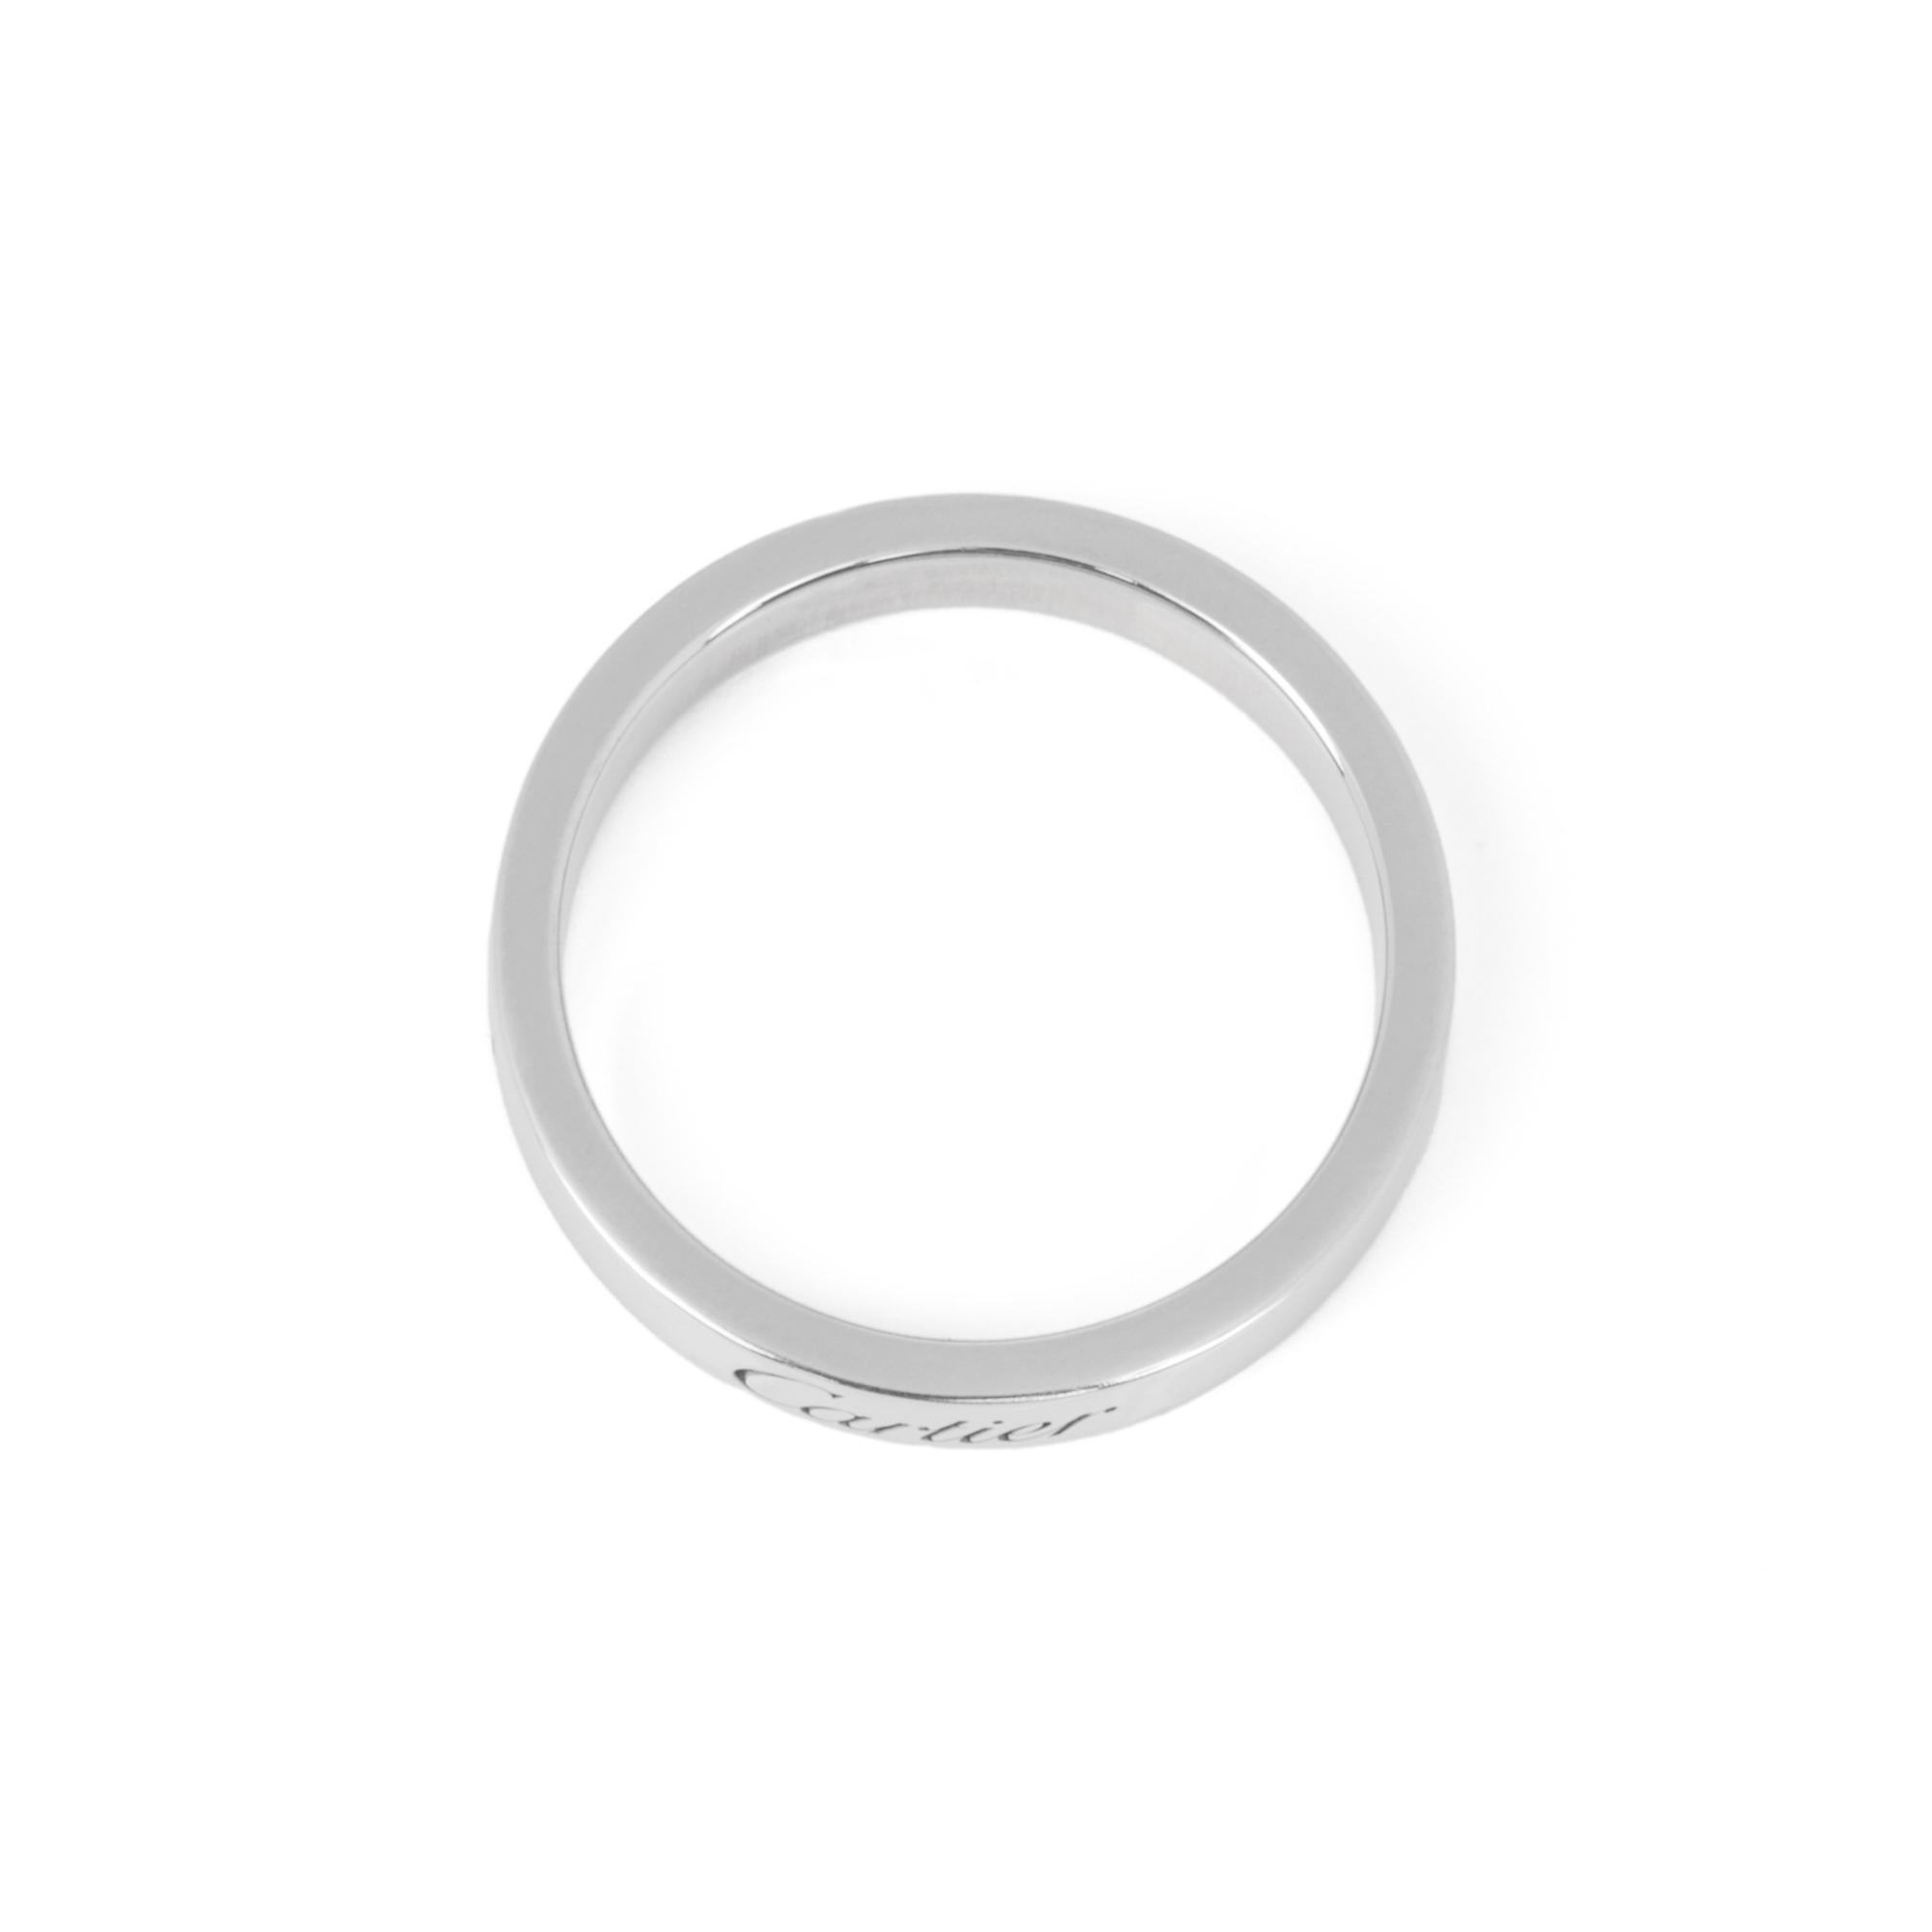 Cartier Platinum C De Cartier Wedding Band Ring

Brand- Cartier
Model- C de Cartier Wedding Band
Product Type- Ring
Serial Number- TE****
Accompanied By- Cartier Pouch, Certificate
Material(s)- Platinum
UK Ring Size- L
EU Ring Size- 51
US Ring Size-